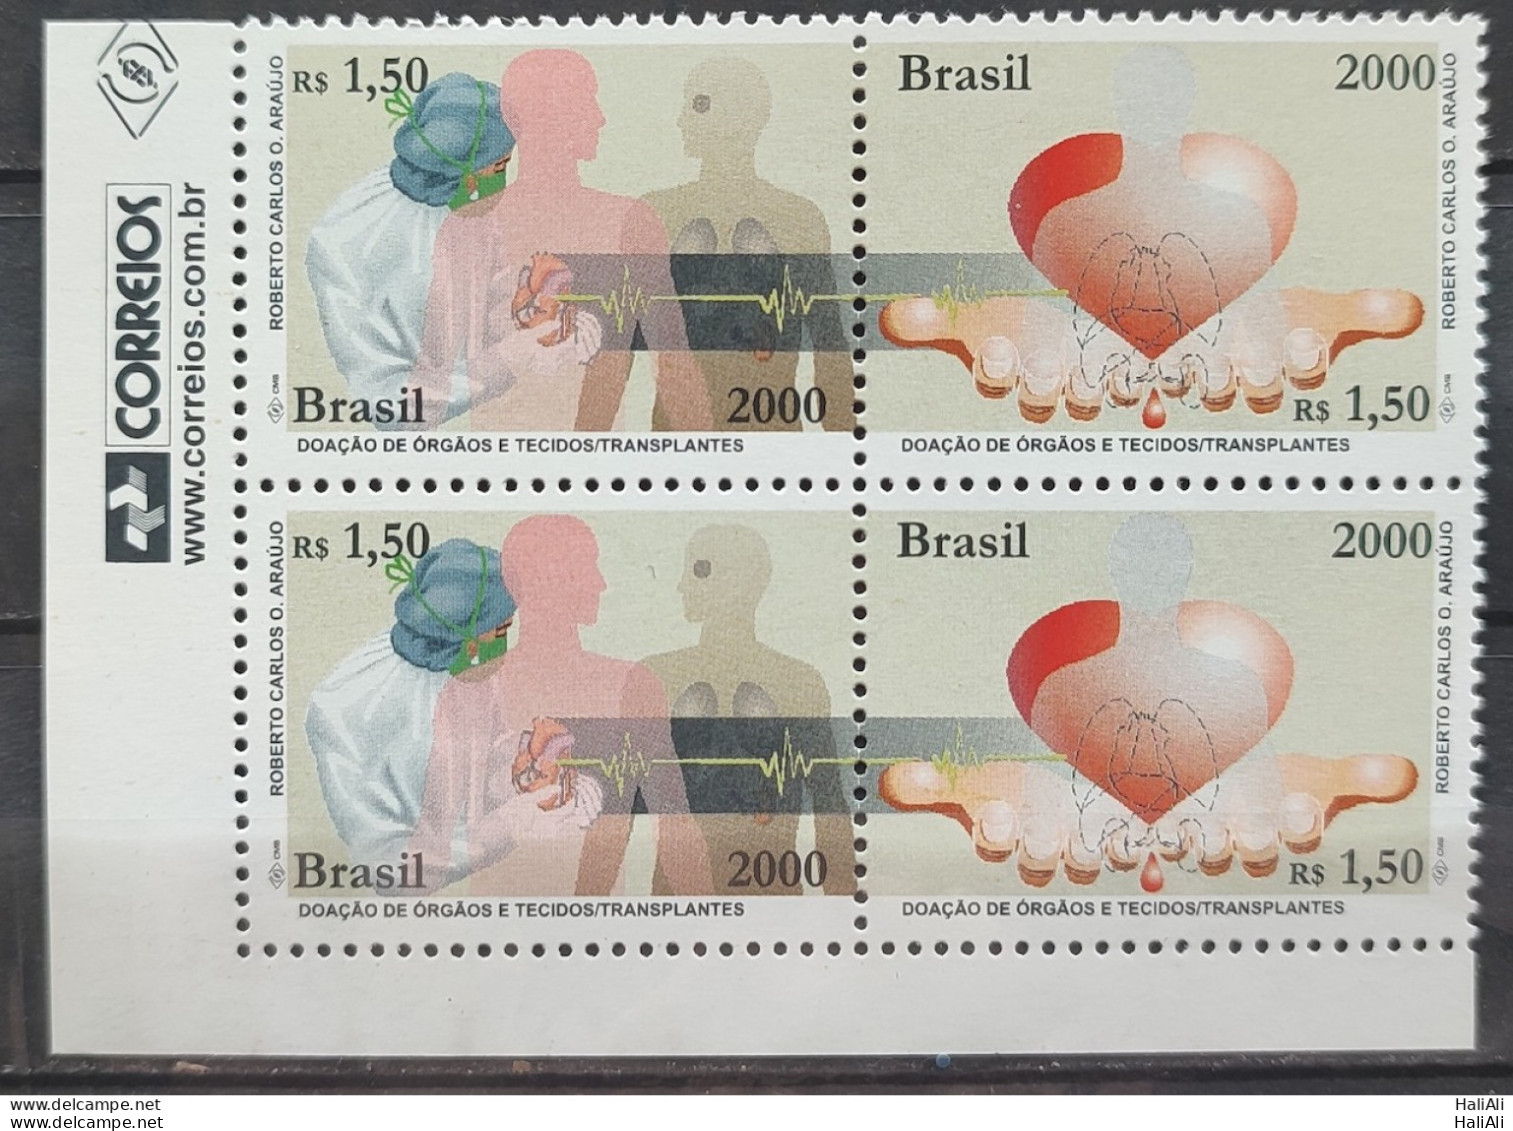 C 2341 Brazil Stamp Donation Of Organ And Tissues Science Health 2000 Block Of 4 Vignette Post Office - Ungebraucht